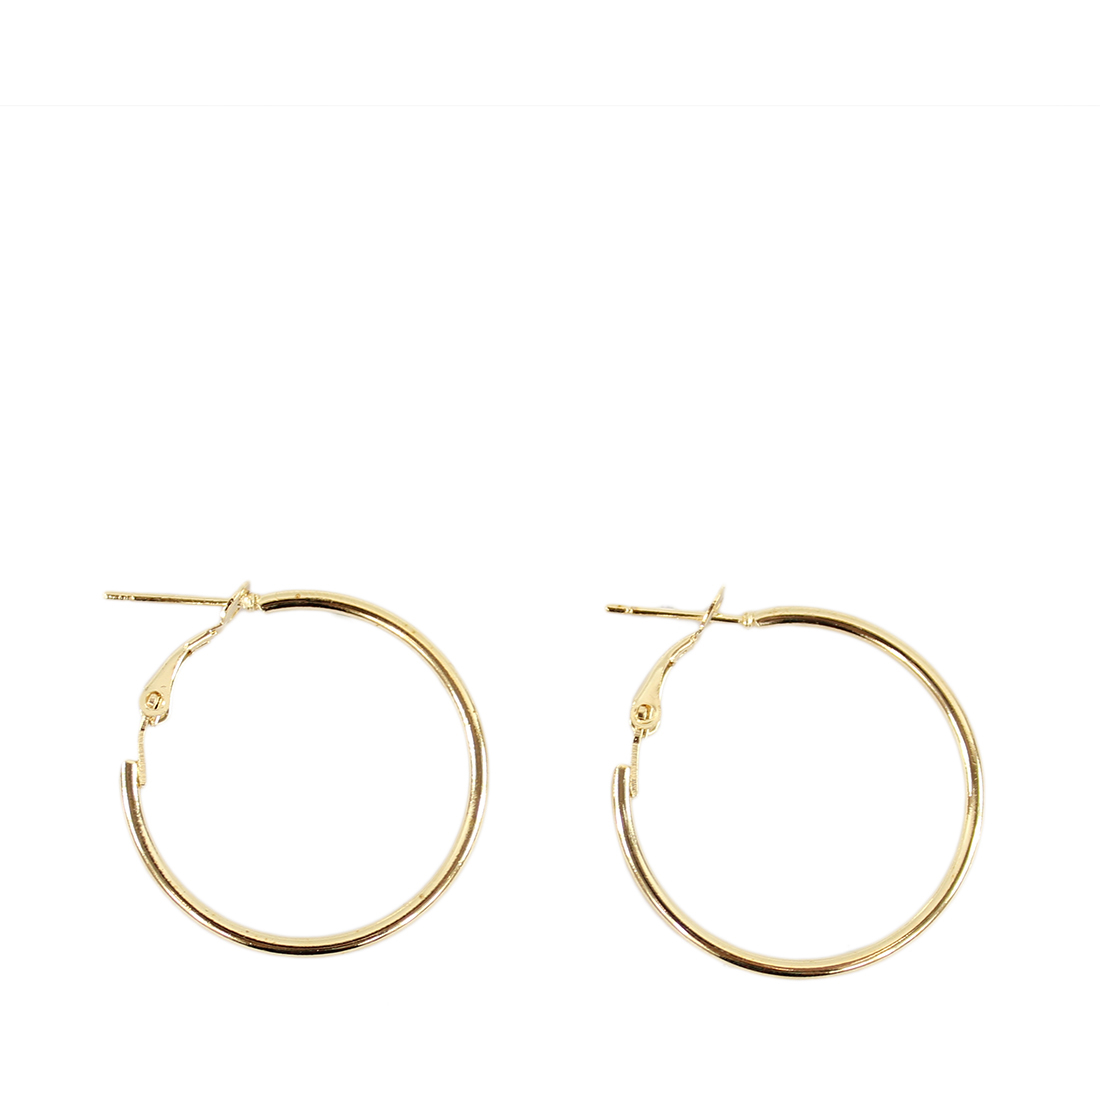 Small size hoops